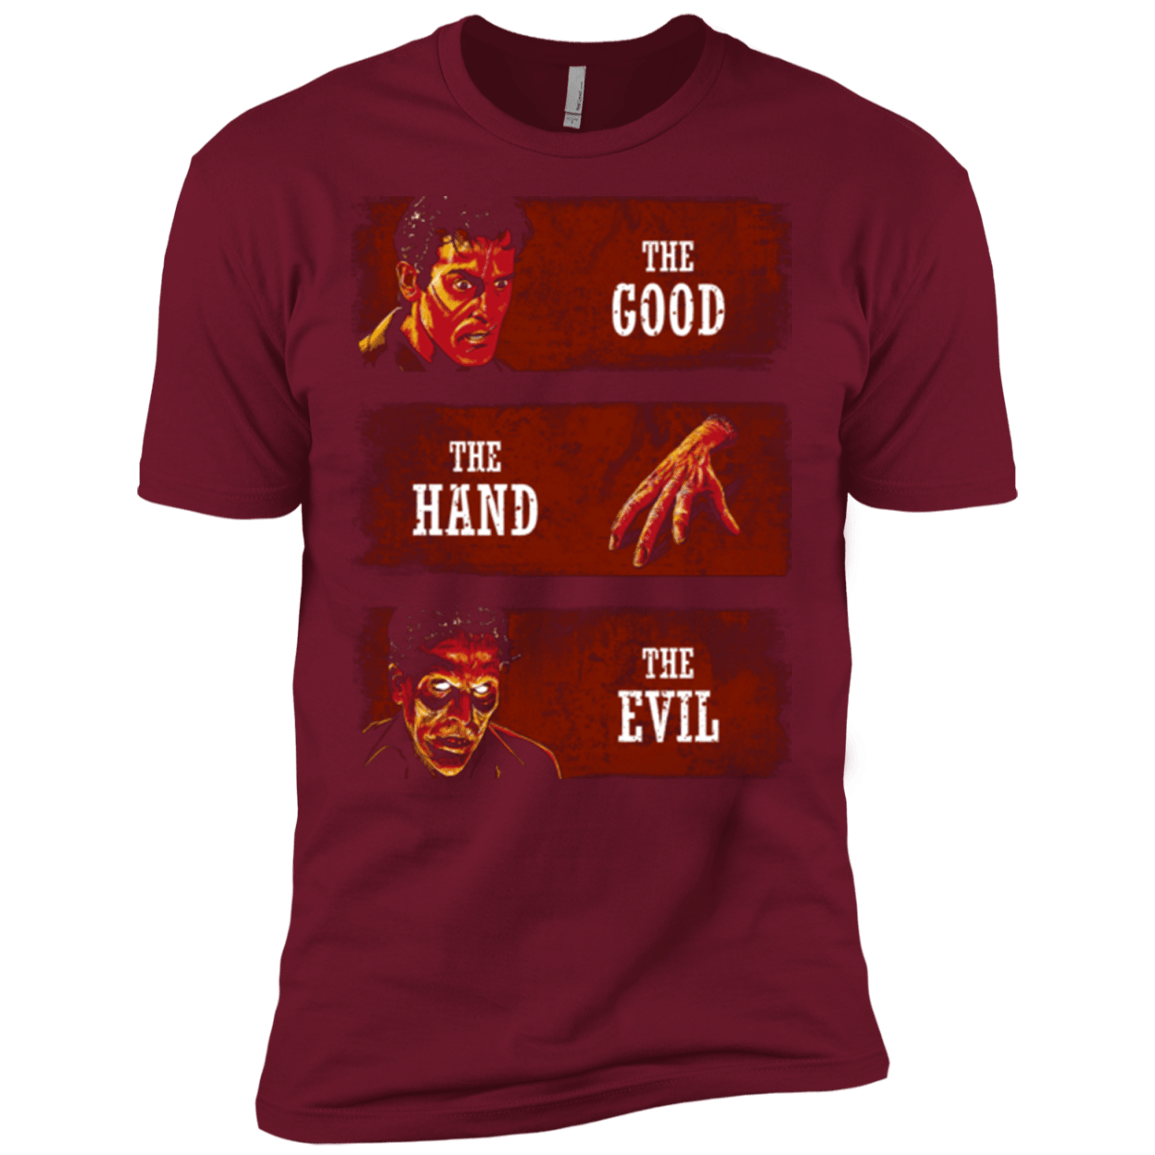 T-Shirts Cardinal / X-Small The Good the Hand and the Evil Men's Premium T-Shirt